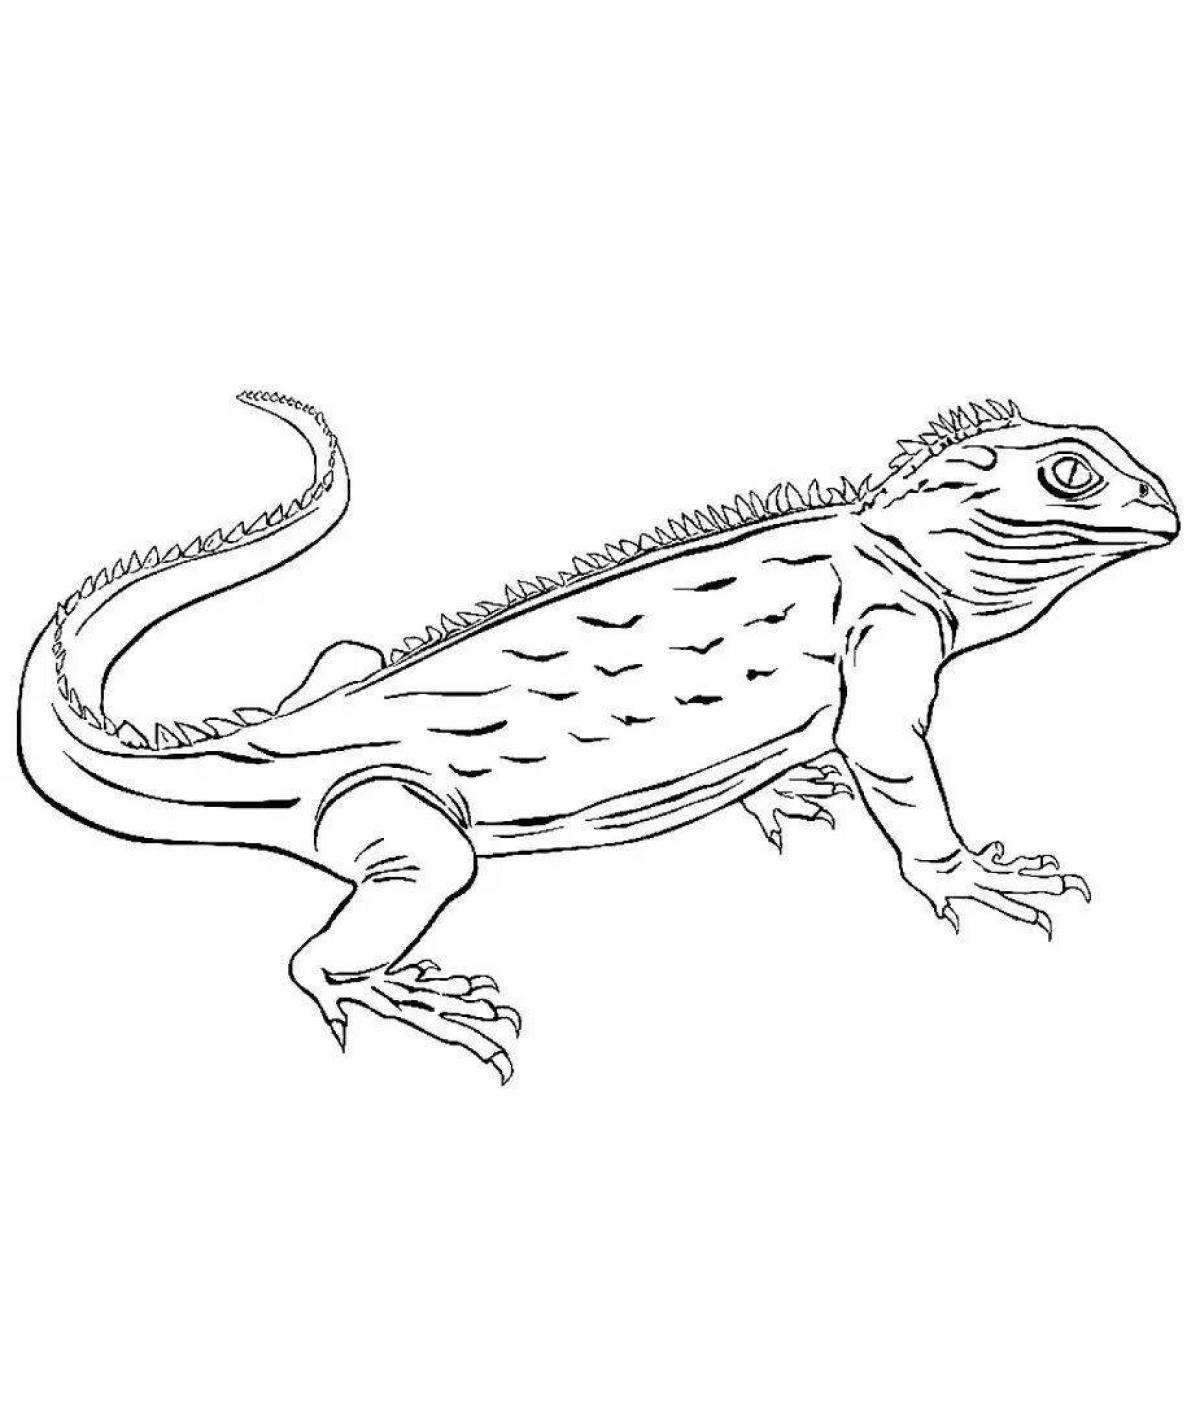 Colorful reptile coloring pages